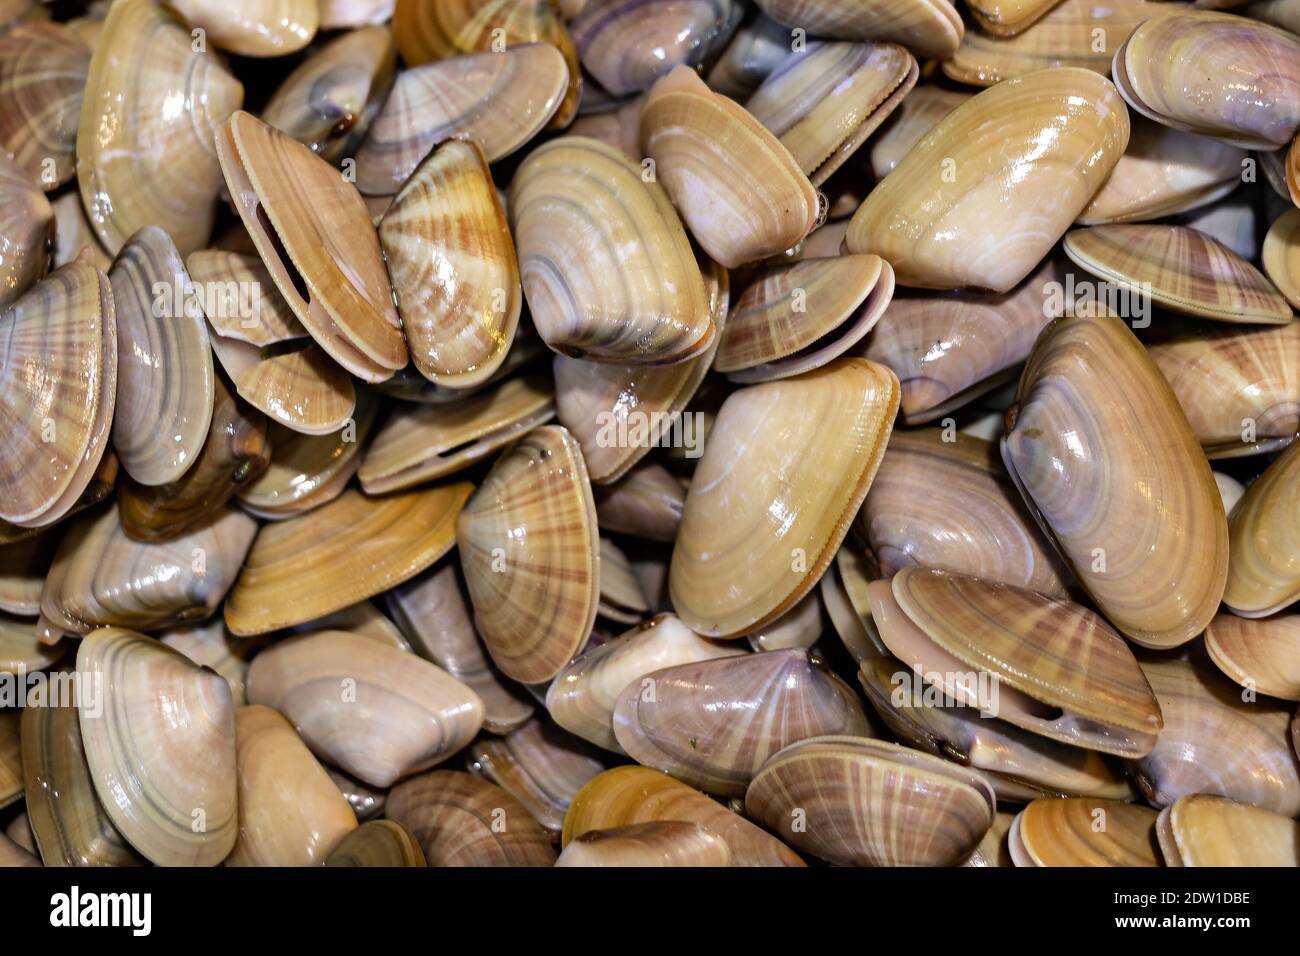 View of Texture of clams (coquina) Stock Photo